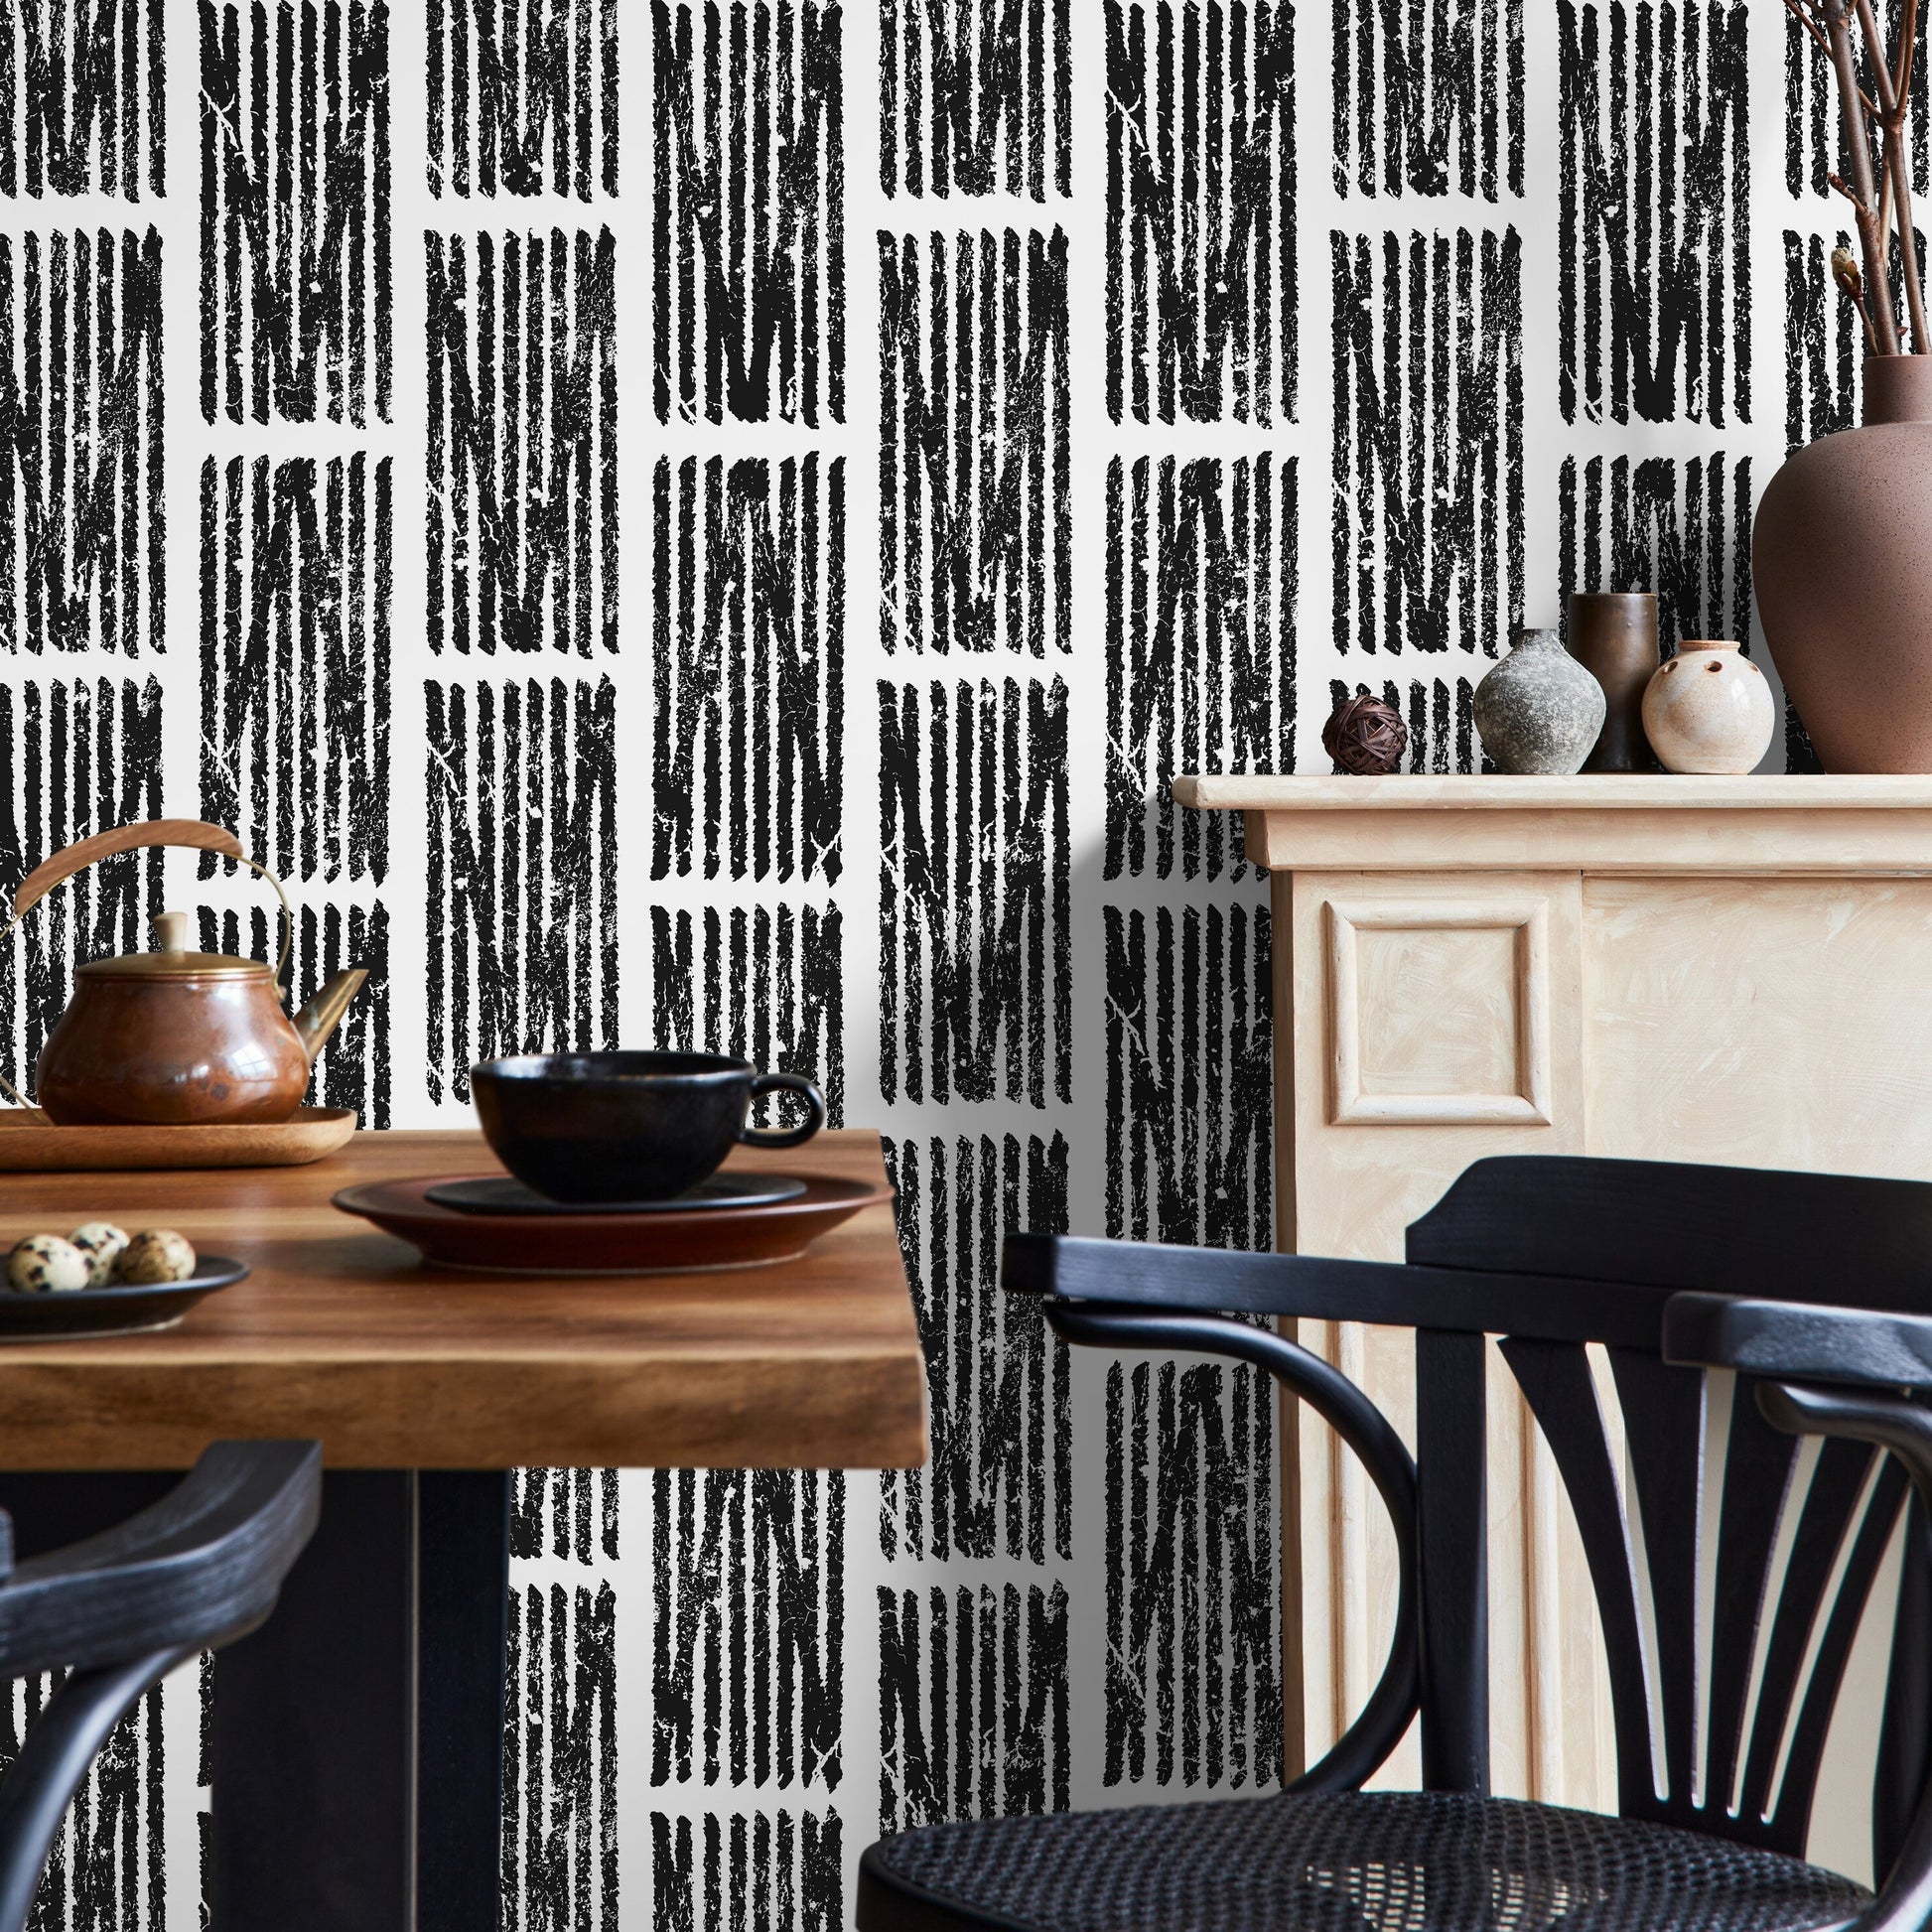 Wallpaper Peel and Stick Wallpaper Removable Wallpaper Home Decor Wall Art Wall Decor Room Decor / Black and Gray Geometric Wallpaper - C550